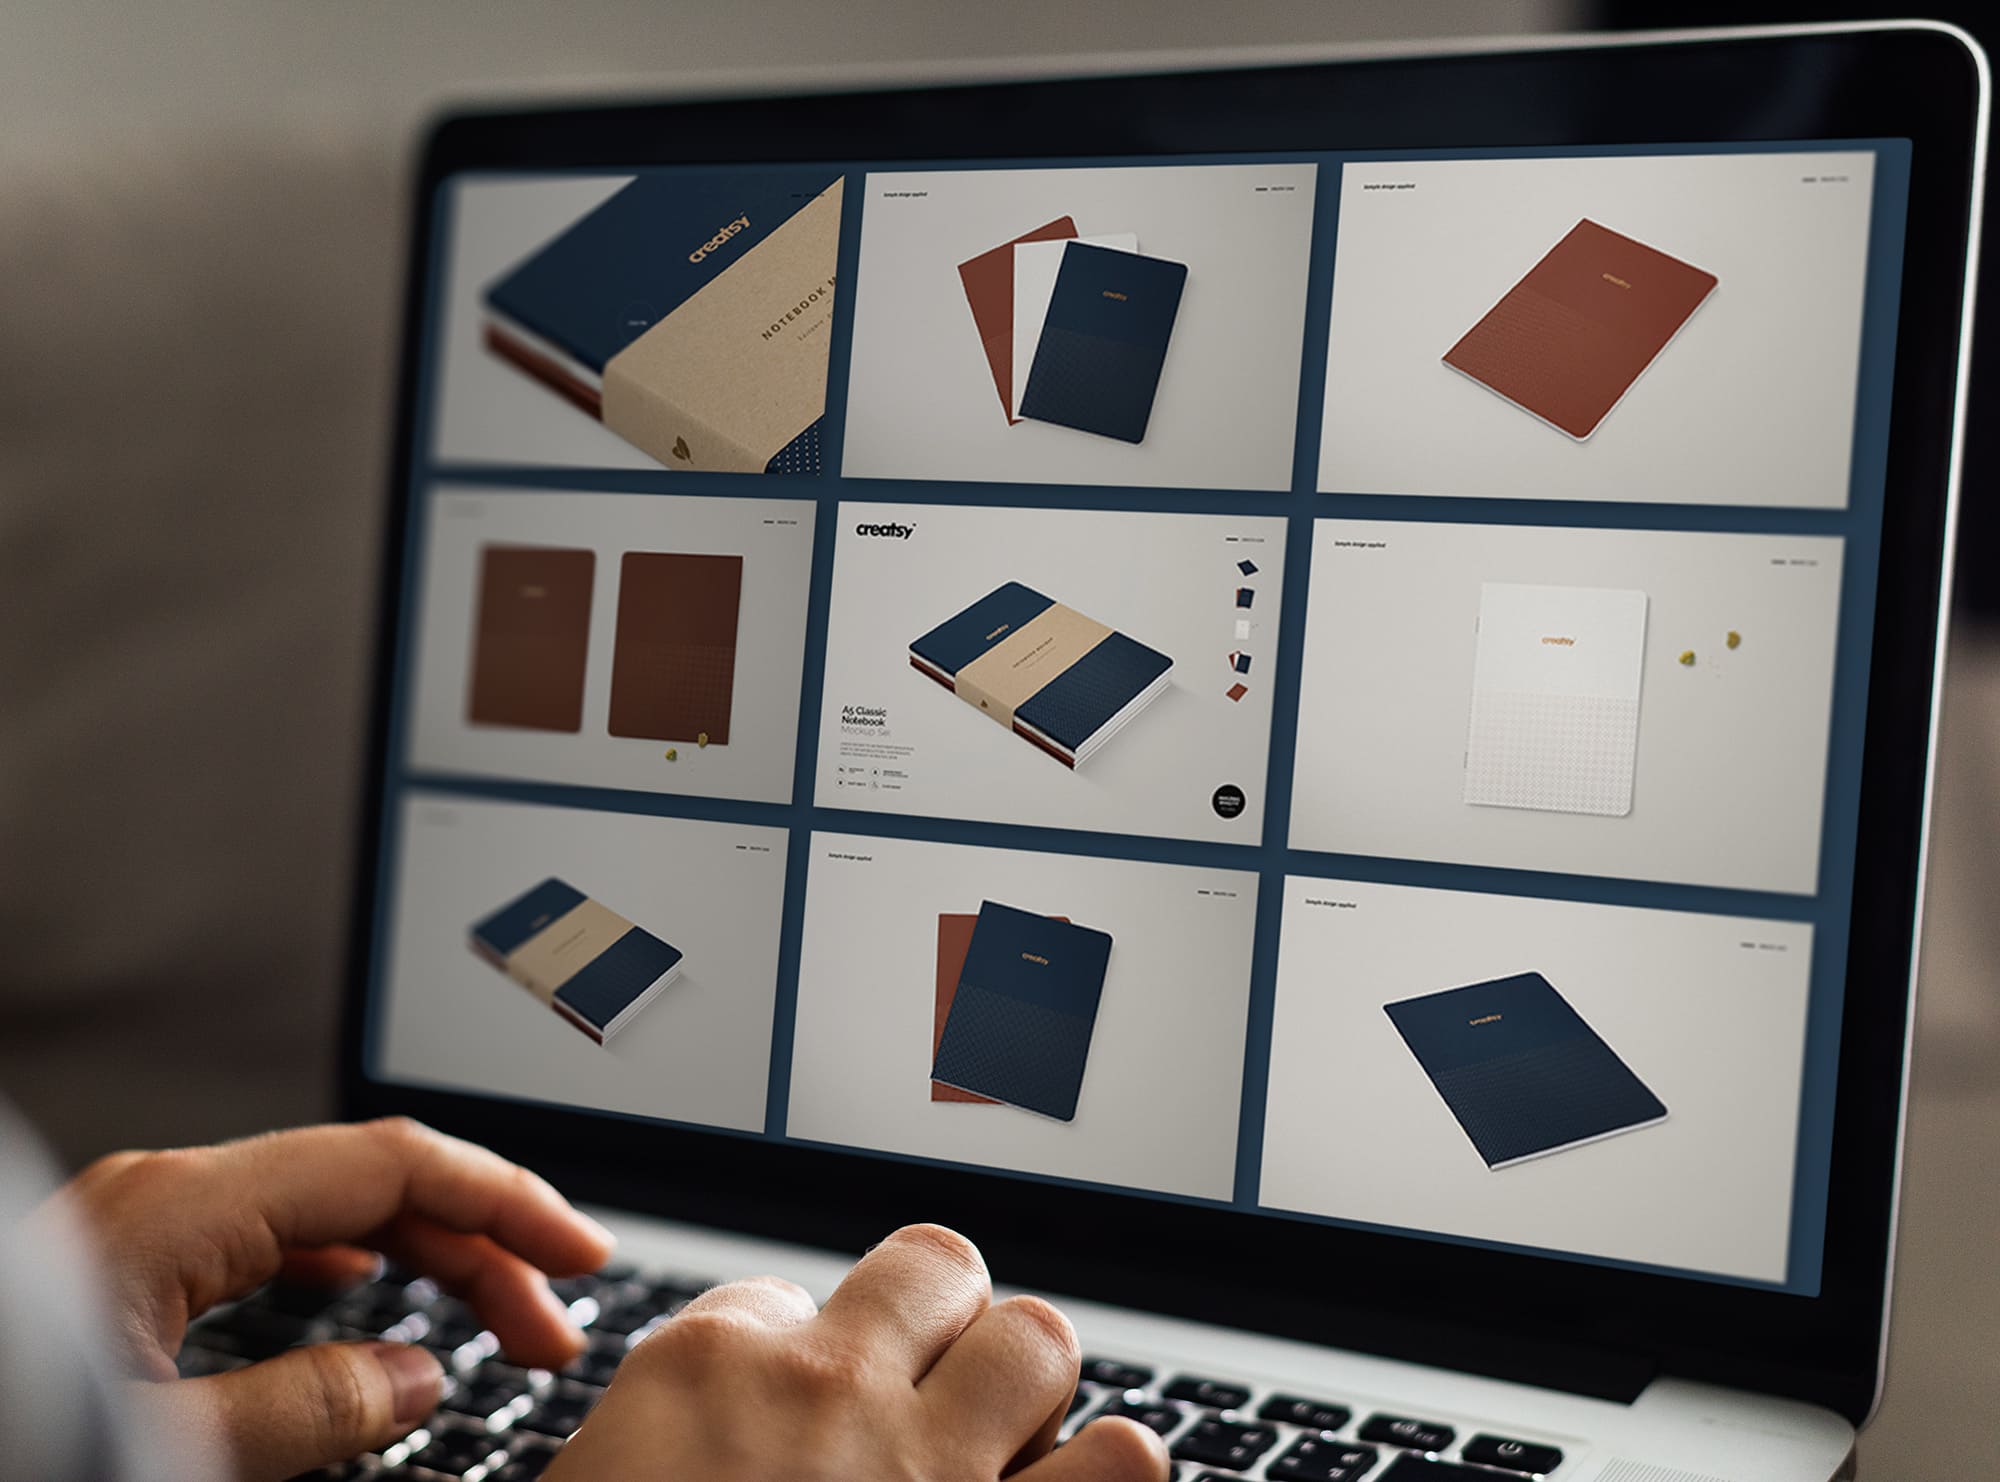 Laptop on screen with images of colorful A5 classic notebook mockups.